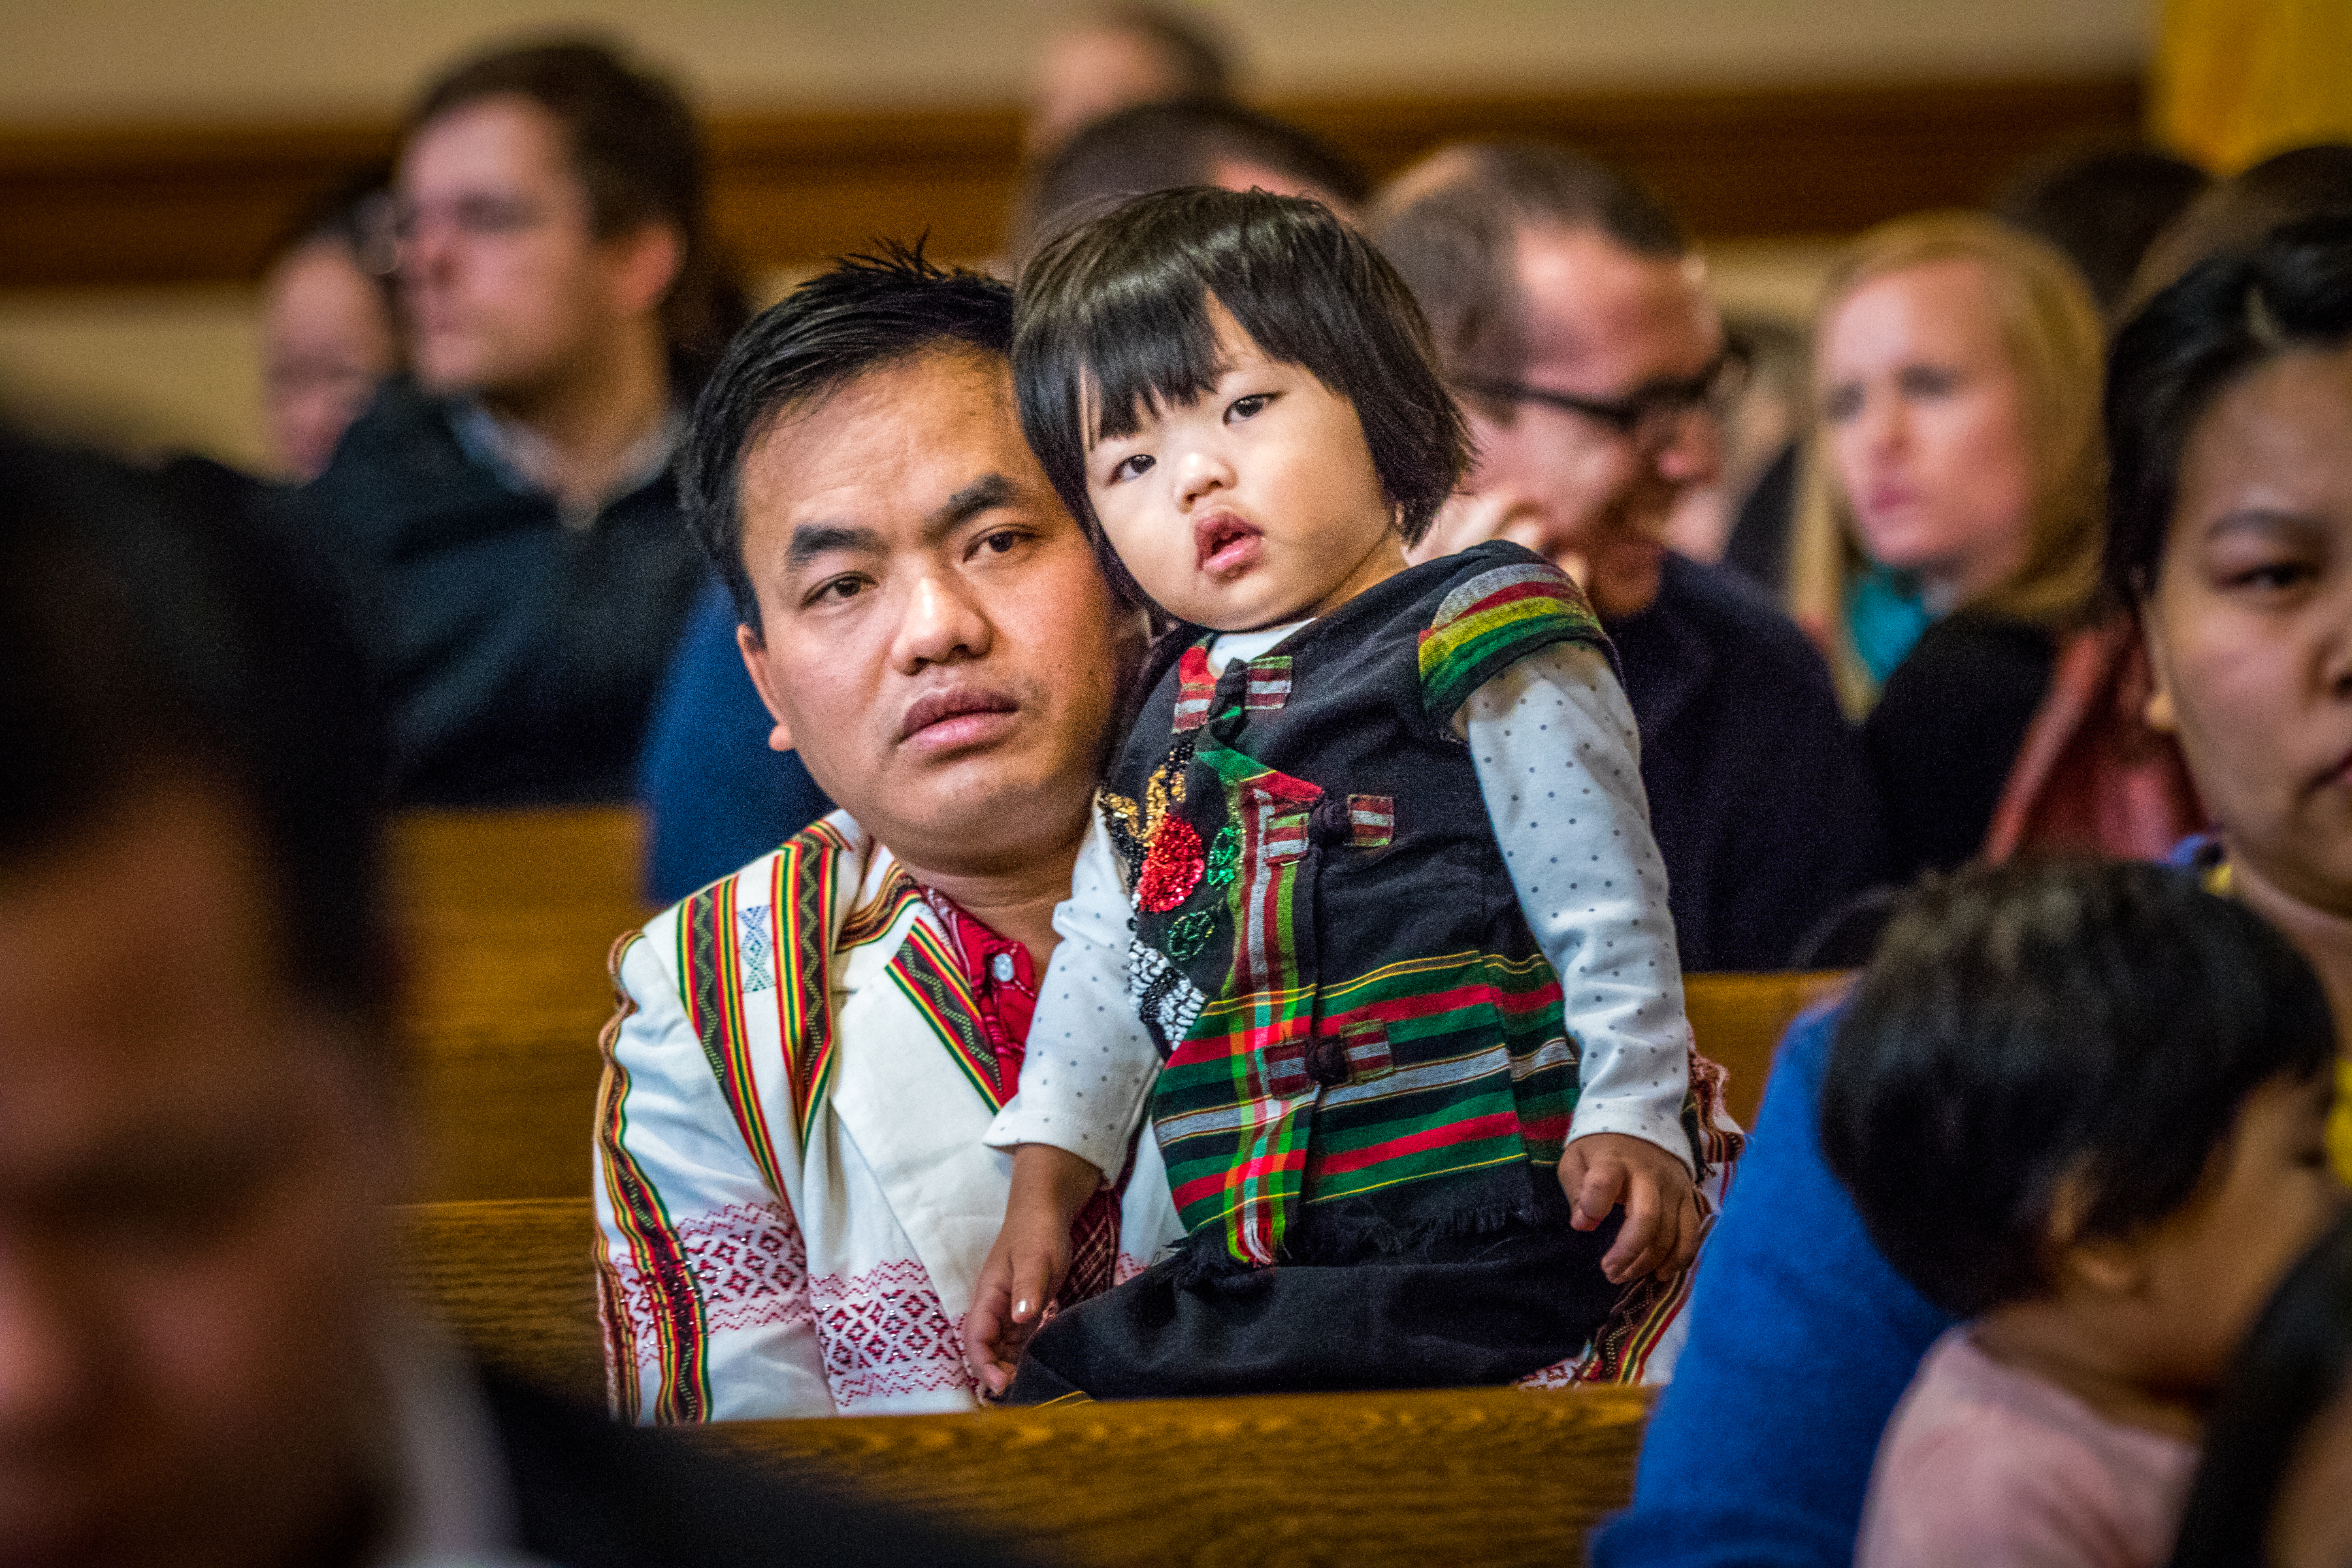 Before the annual Migration Mass at St. Pius V Church in St. Louis in 2017, Lian Khartoum Pinang settled his 2-year-old daughter, Don Ngaih Lun. The parish has a large immigrant community.